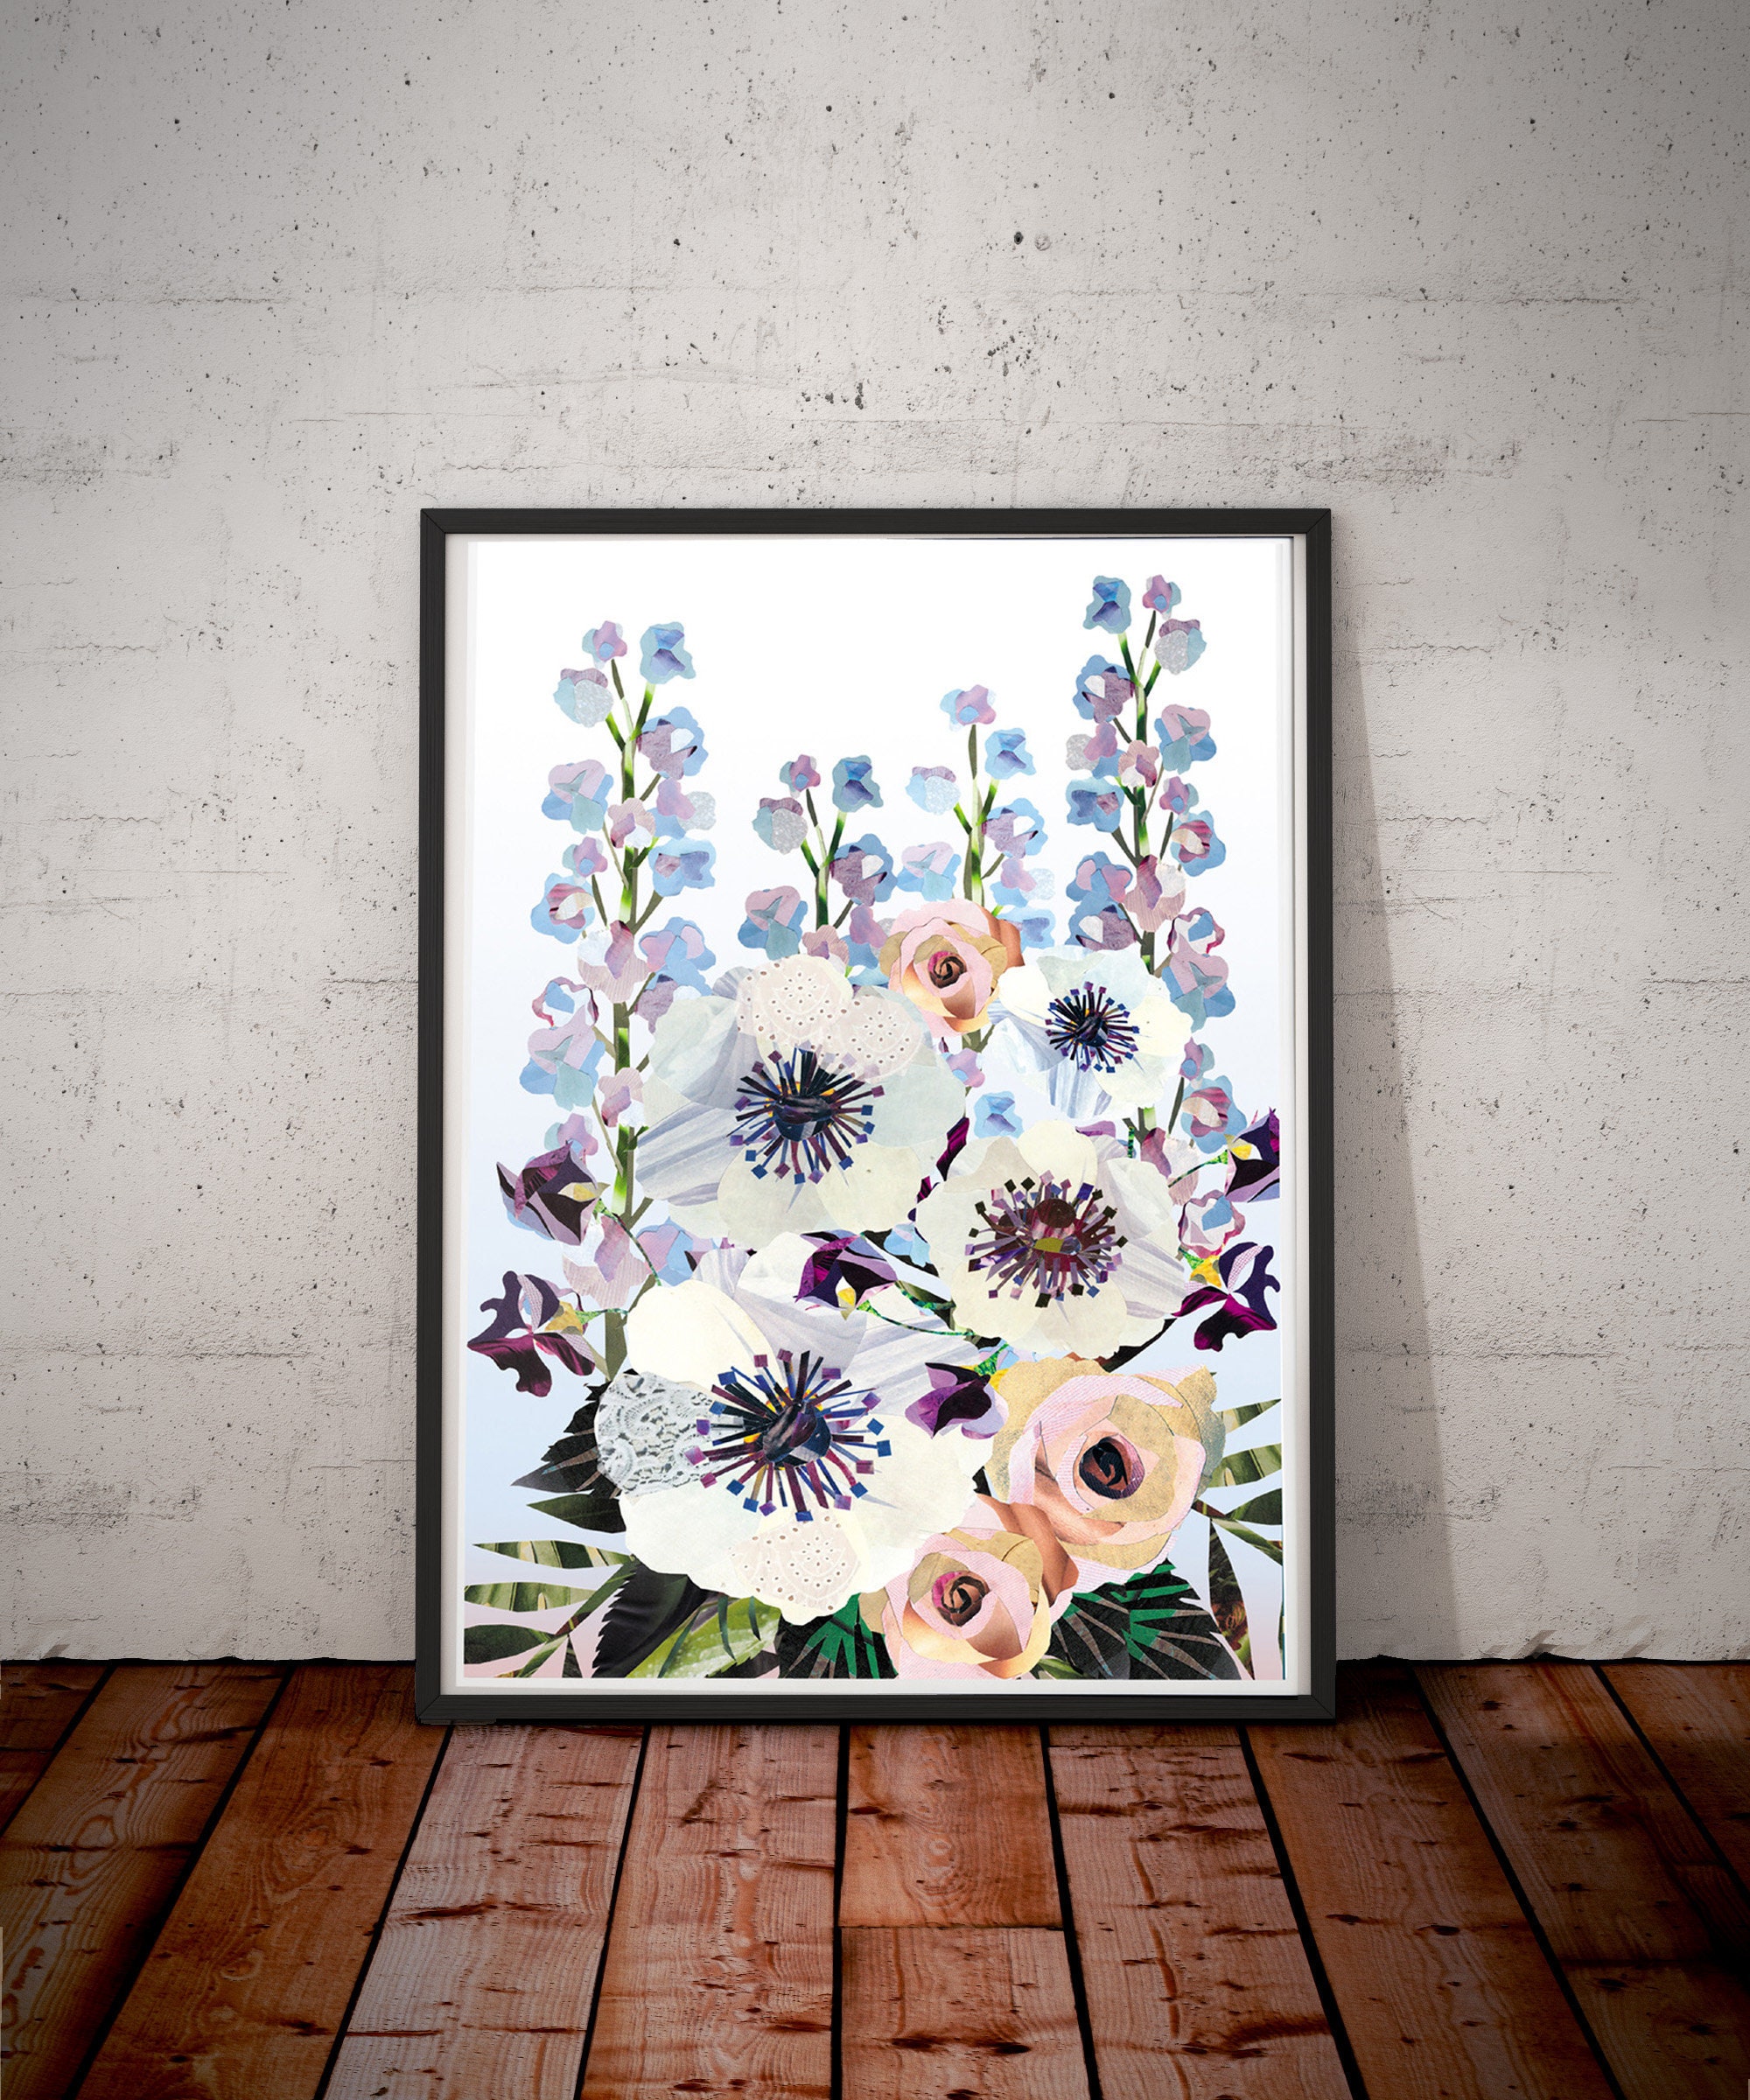 Lilac Anemone A1 Poster ǀ Statement Wall Art, Floral Art, Home Decor,  Bouquet, Botanical, Contemporary Collage - Etsy